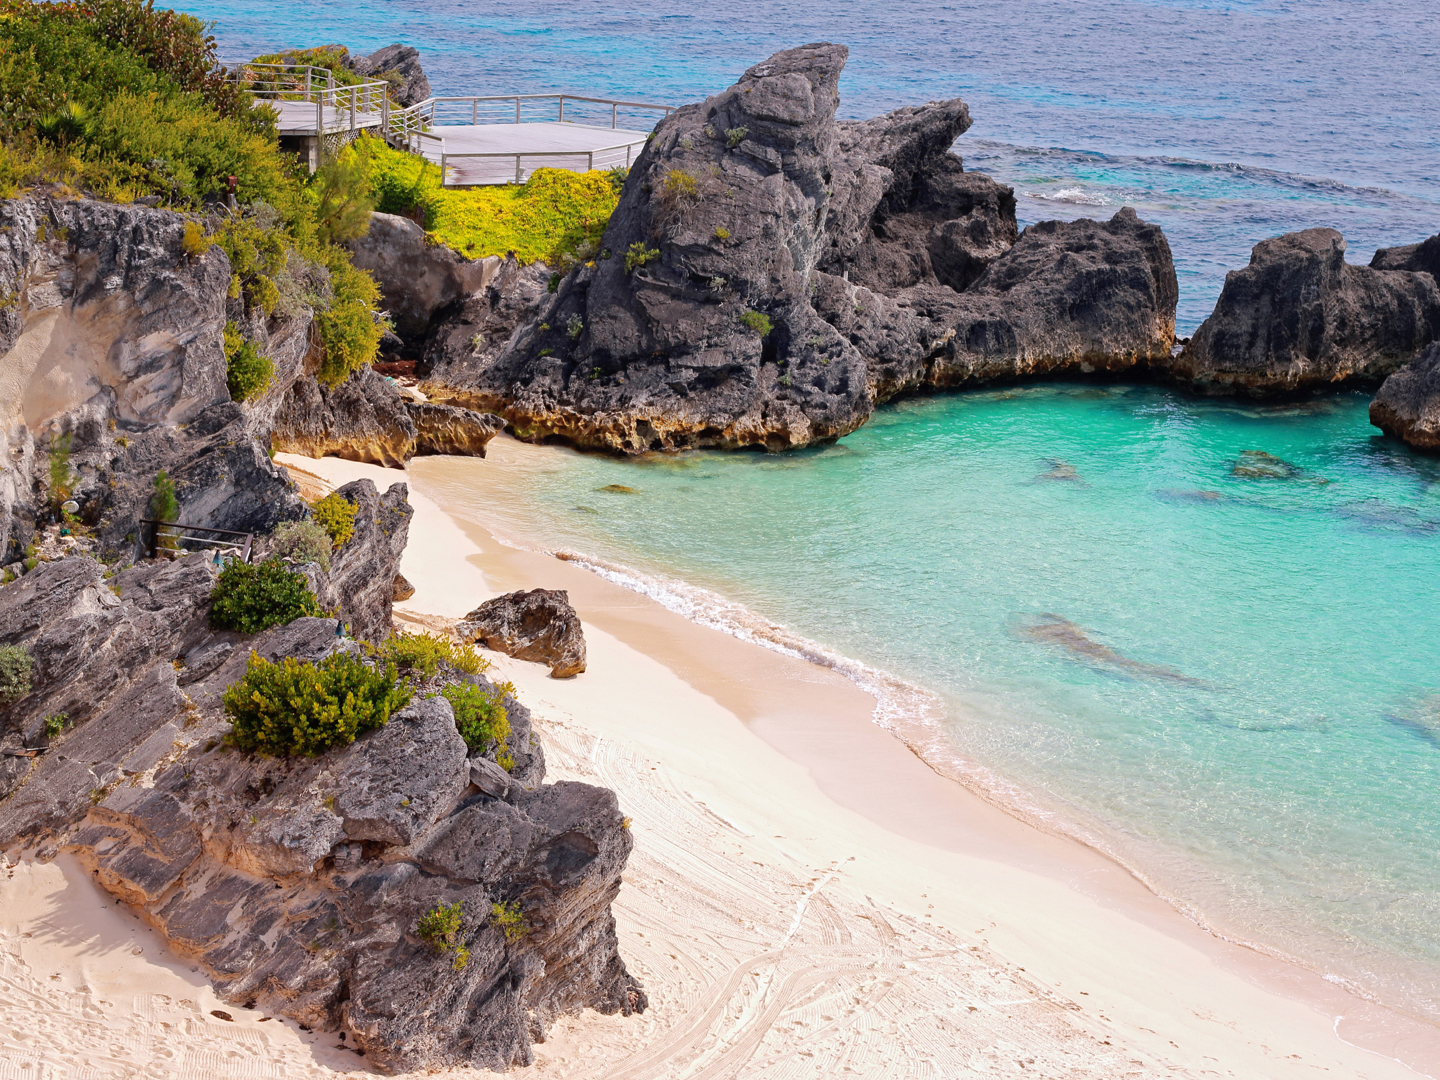 Bermuda is a sailors’ dream filled with hidden bays, secluded islets...